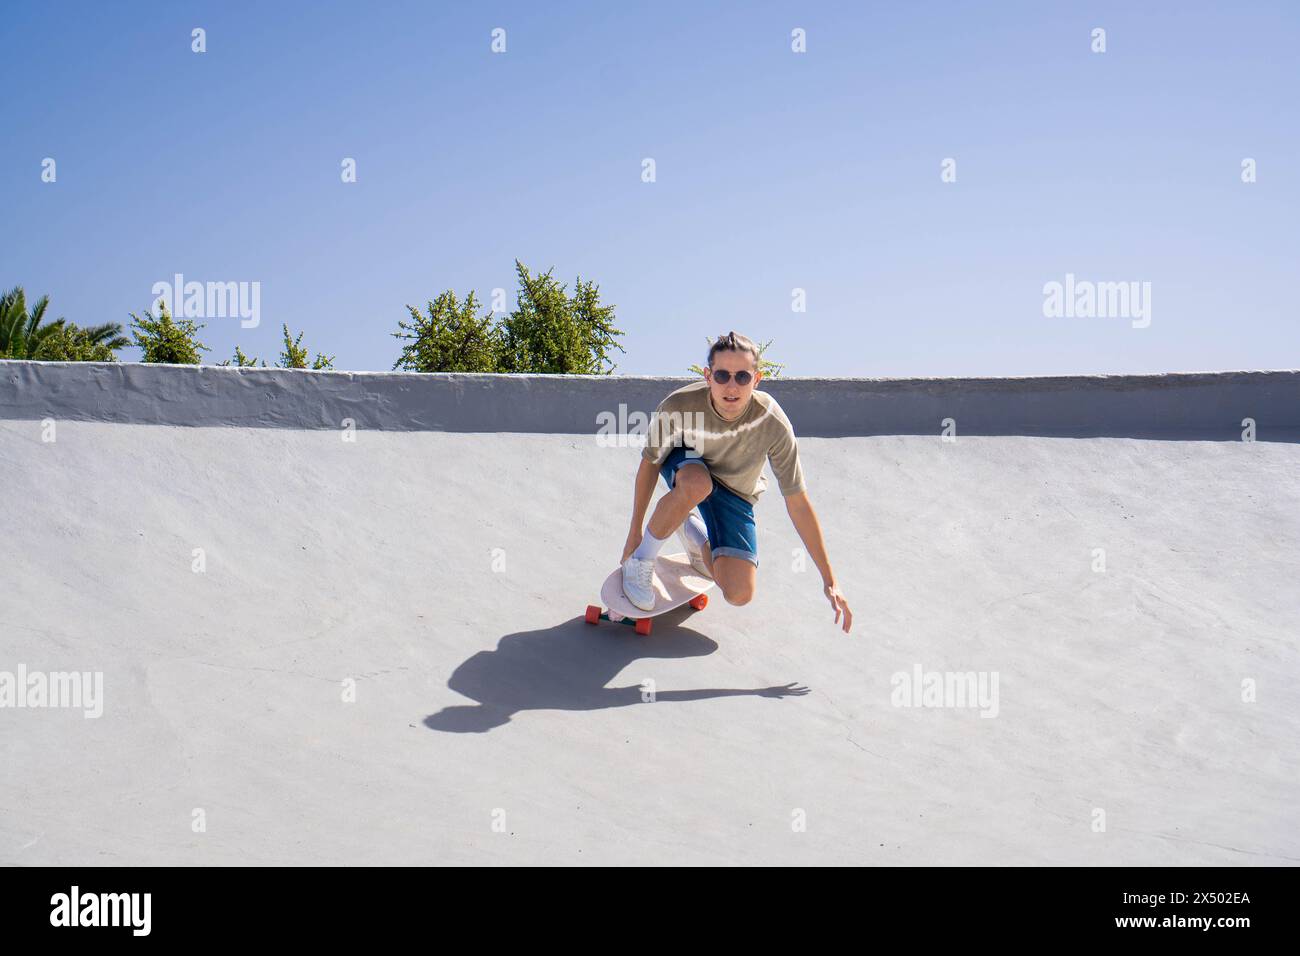 A young man is skillfully riding a skateboard down a cement ramp with a surfskate, showcasing his impressive skating abilities. Stock Photo